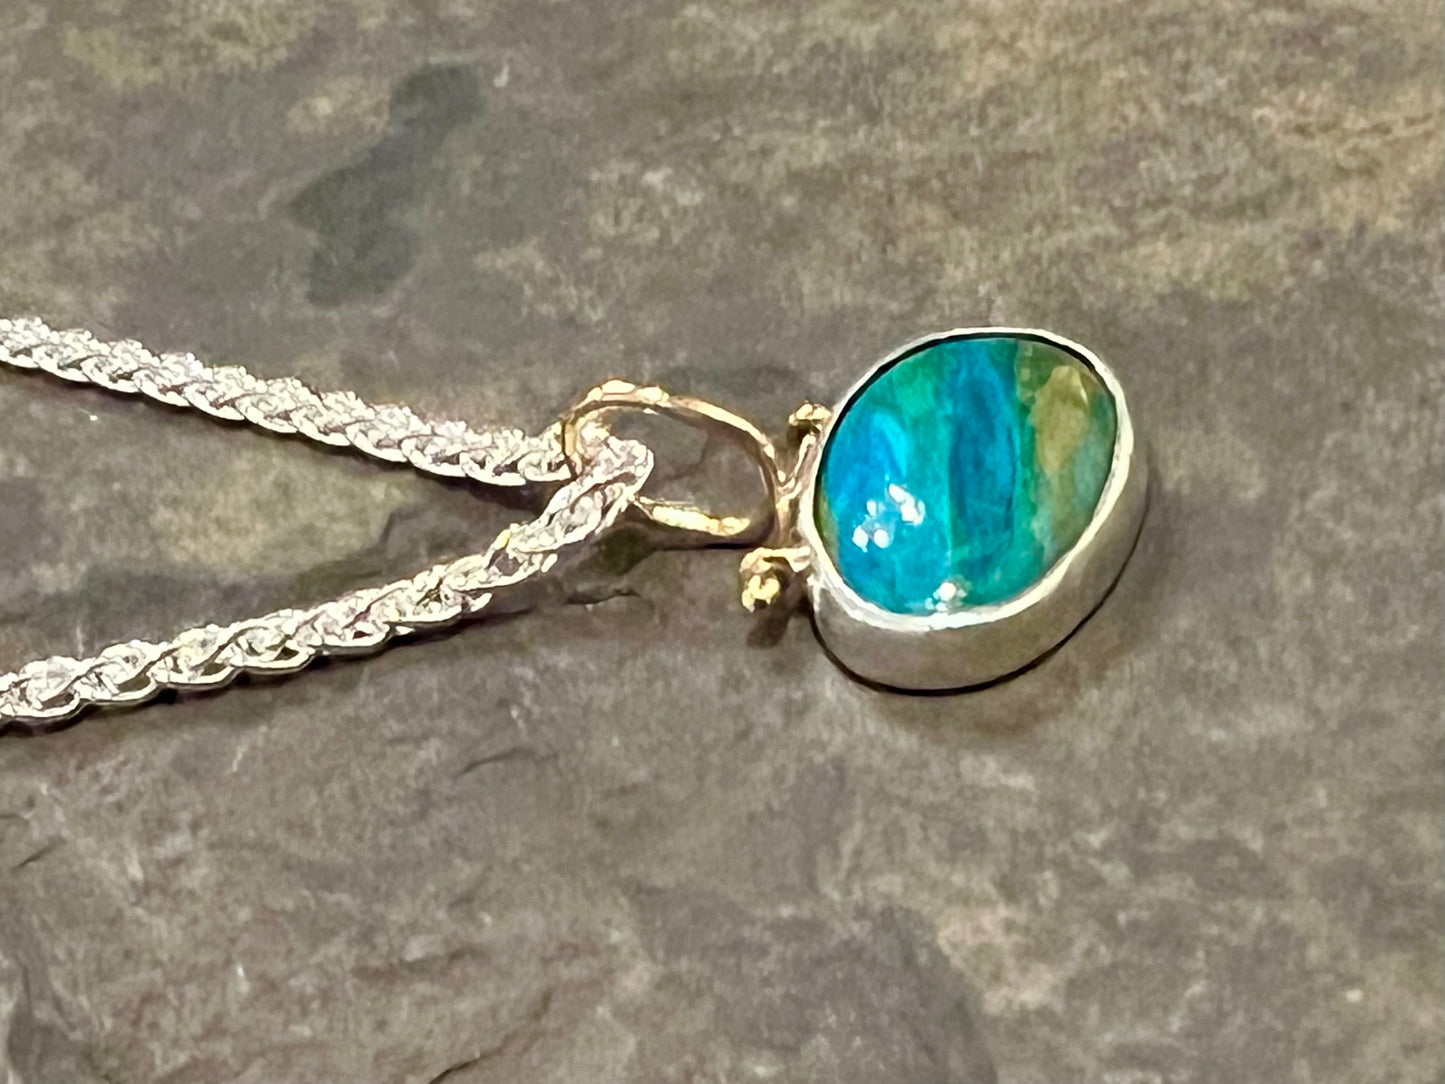 Hinged Peruvian Opal Pendant - One of a Kind Necklace